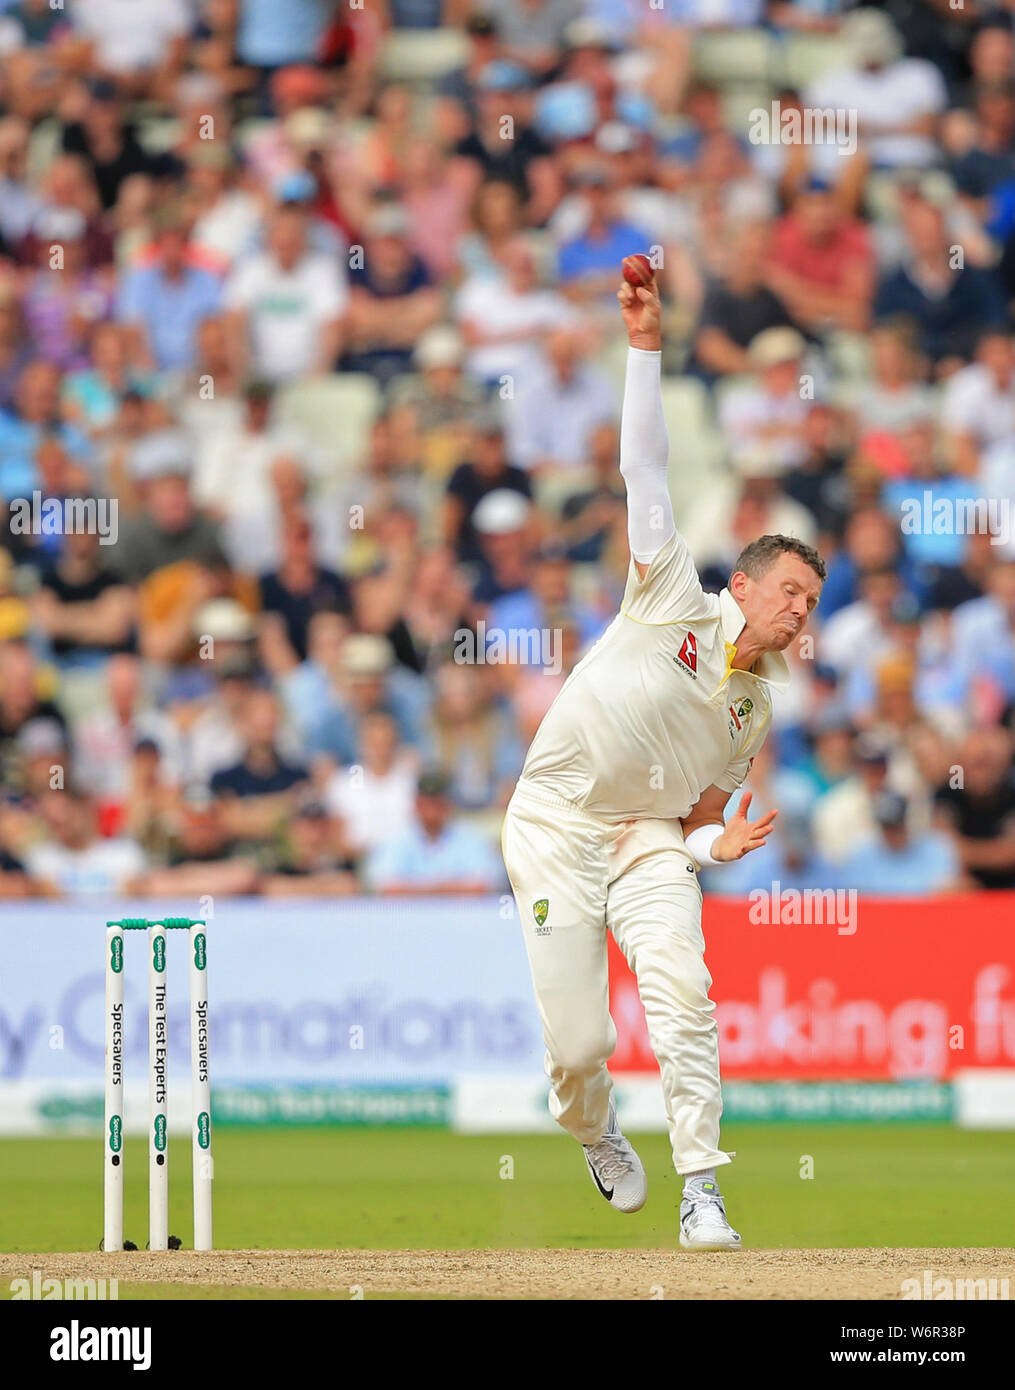 Birmingham, UK. 02nd Aug, 2019. Peter Siddle of Australia bowling during day of The Specsavers Ashes first test match at Edgbaston Cricket Ground, Birmingham. Credit: ESPA/Alamy Live News Stock Photo